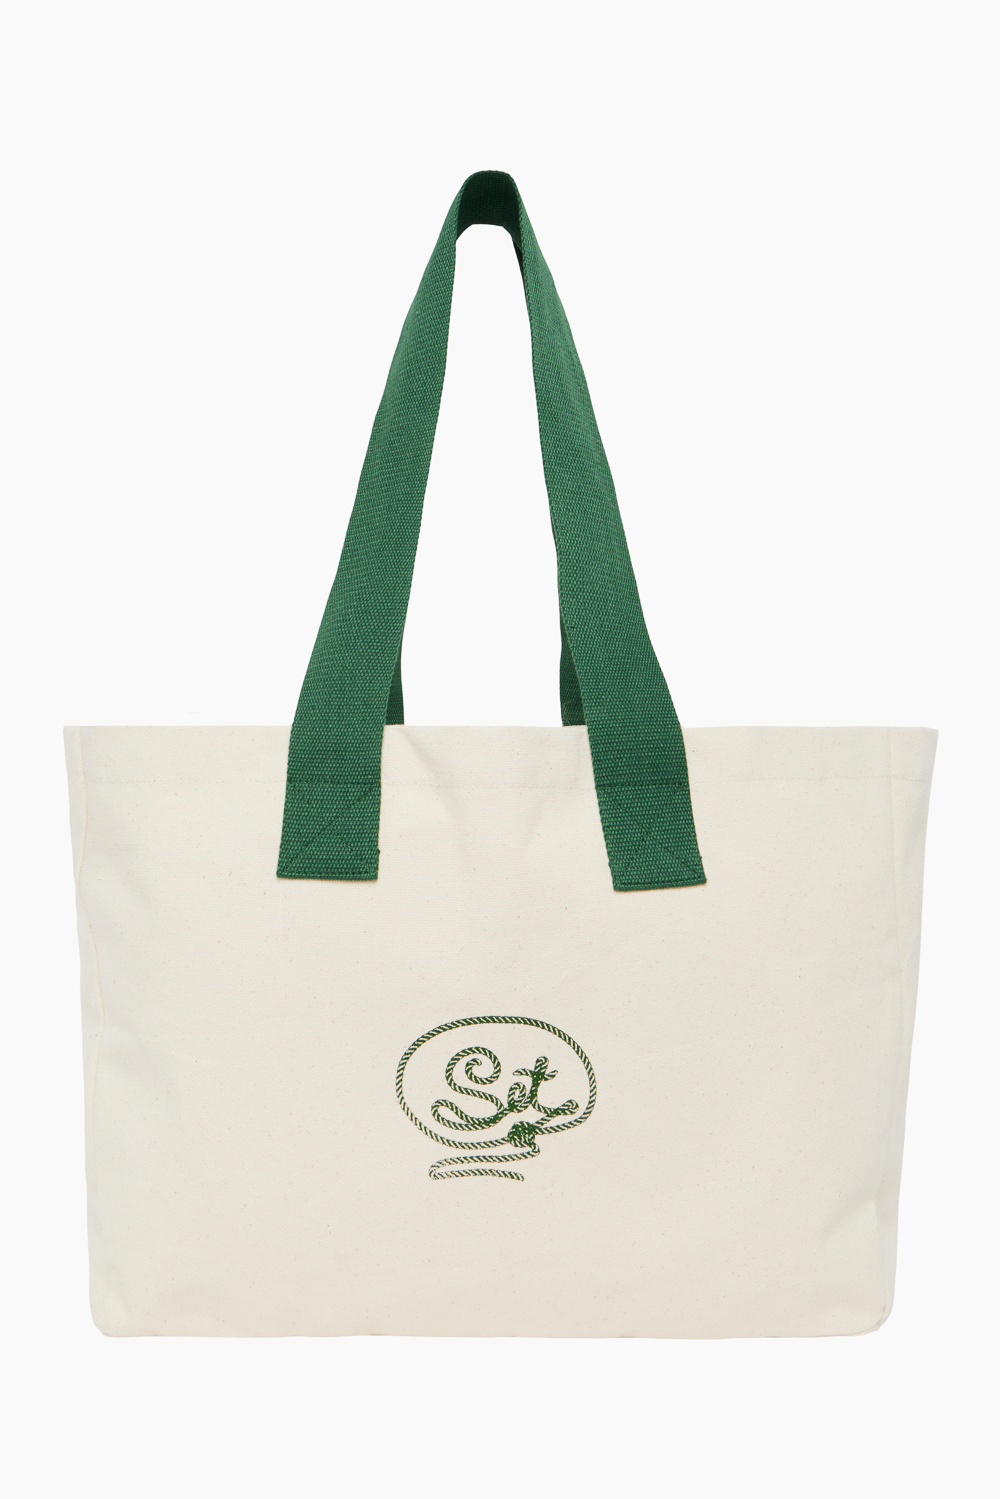 LASSO TOTE BAG - SYCAMORE Featured Image